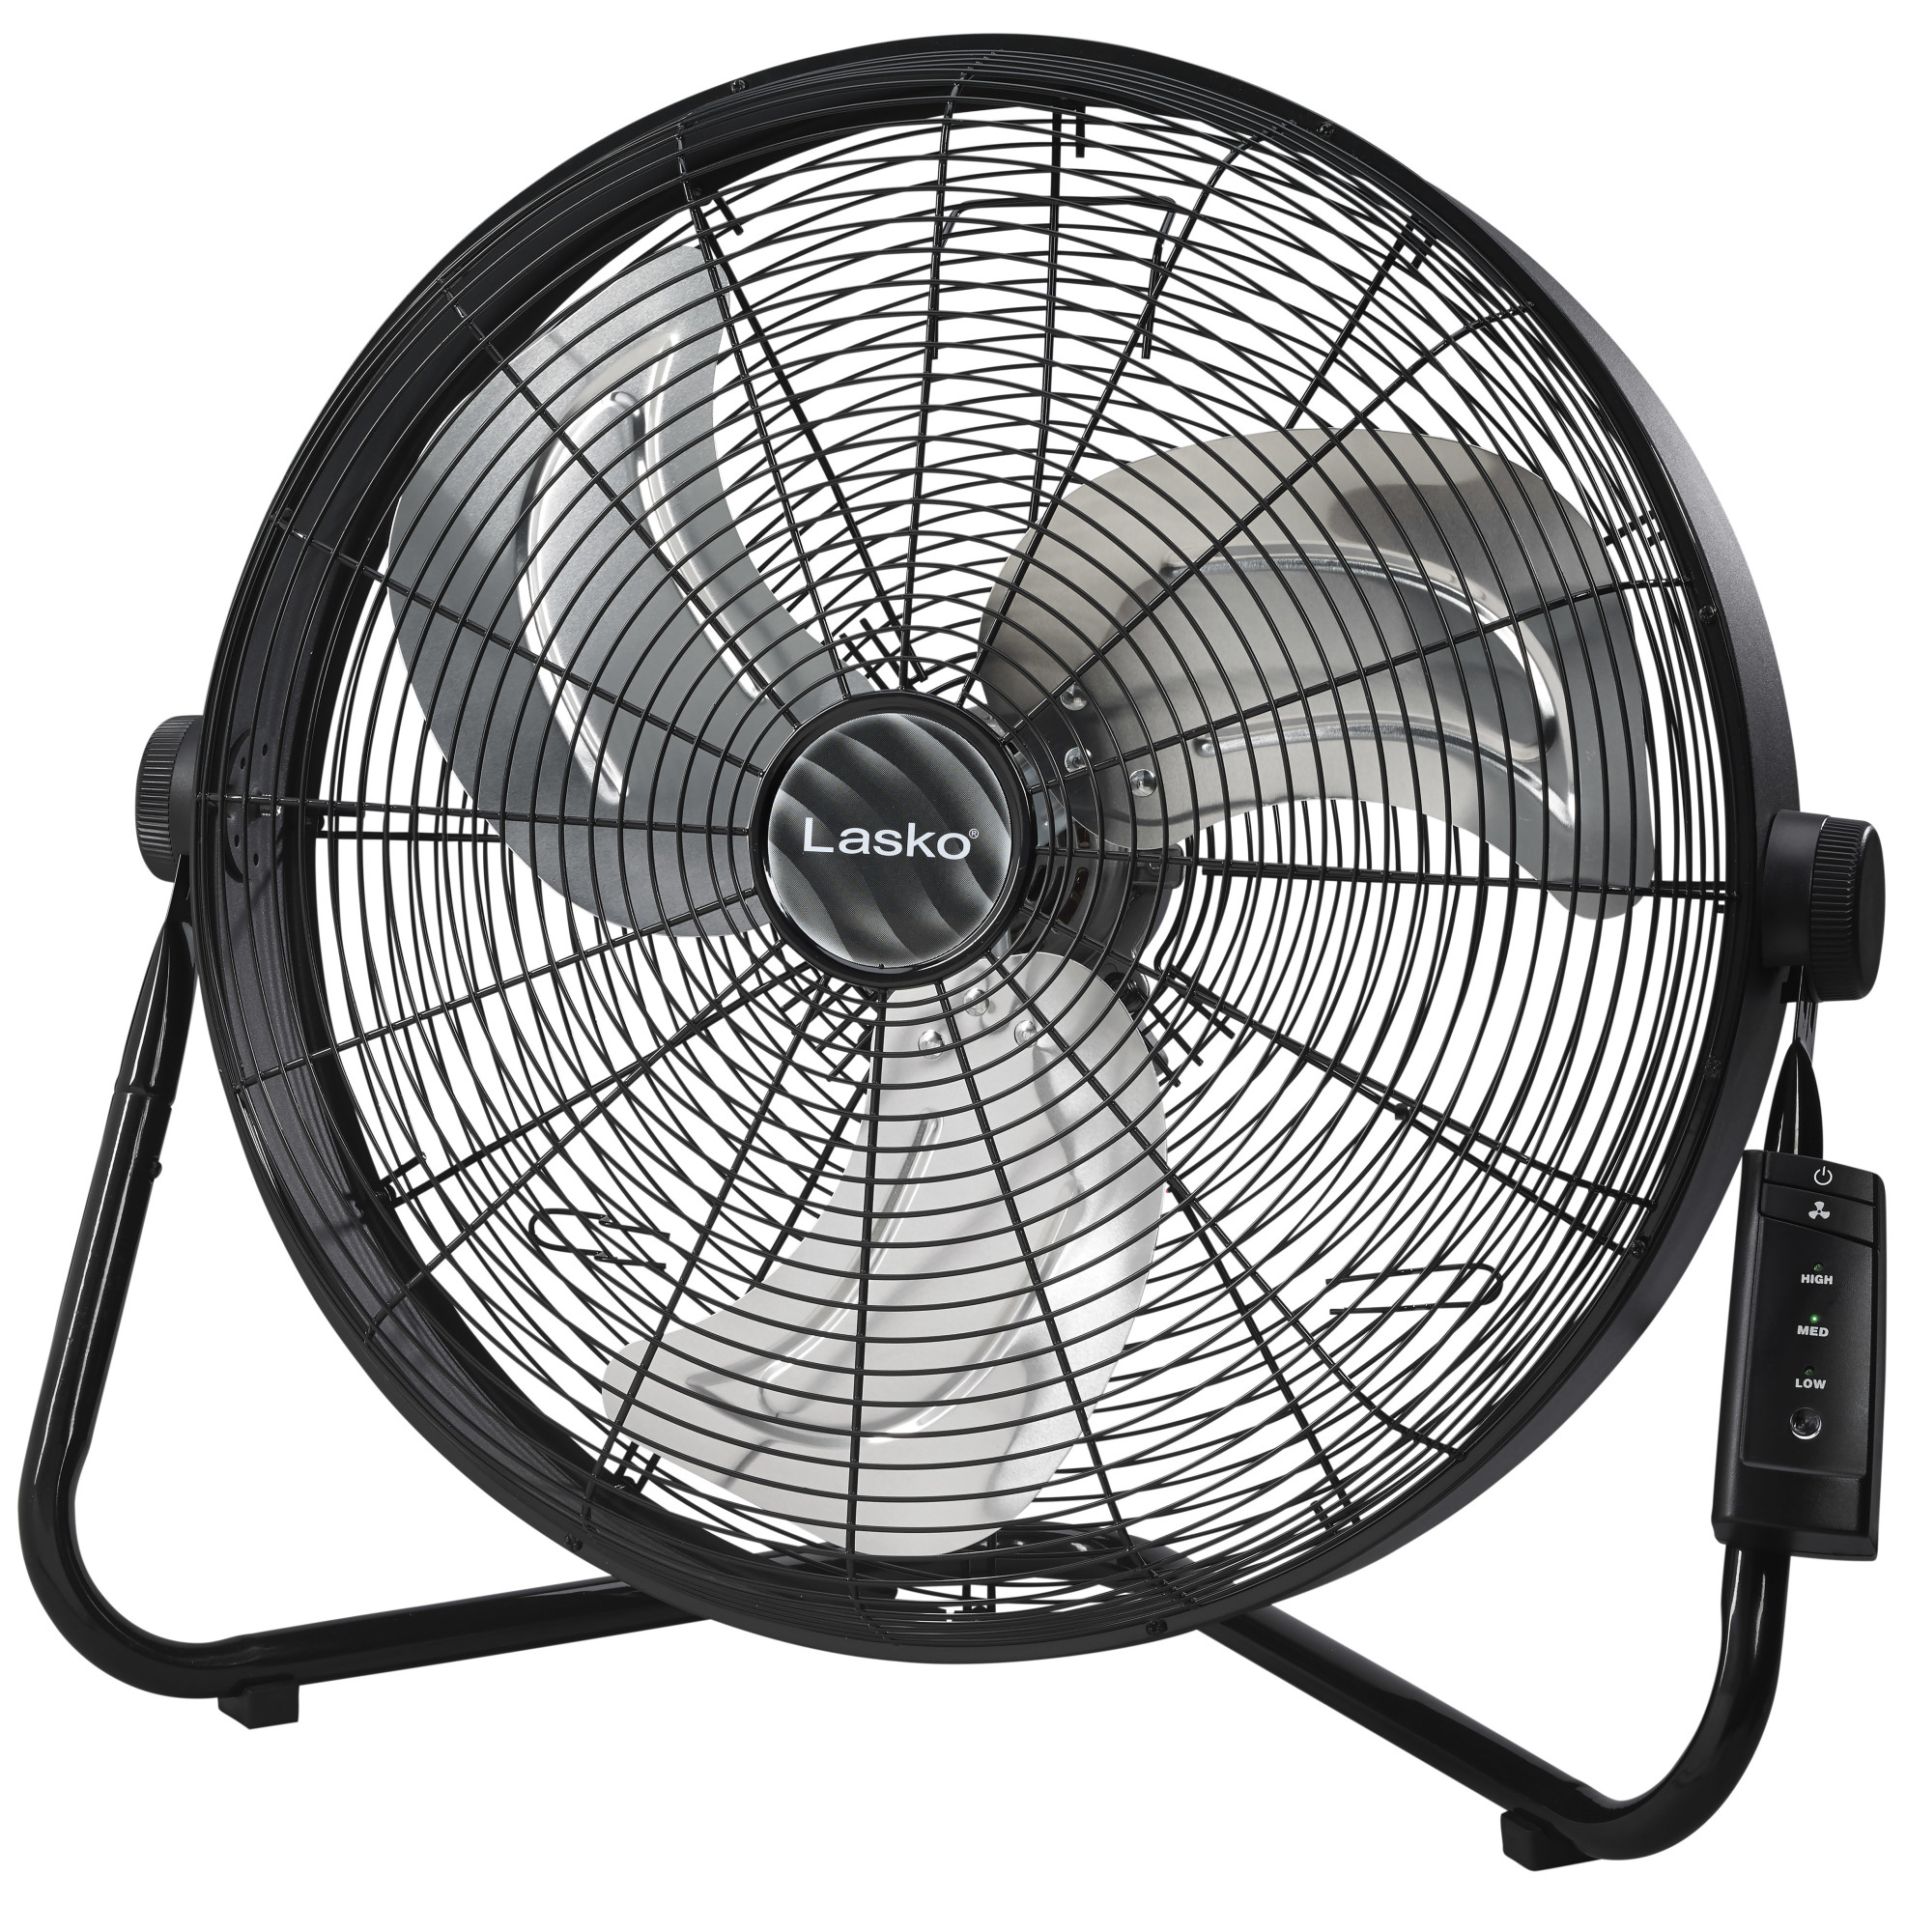 Lasko 20" High Velocity Floor Fan, Wall Mount Option and Remote, 22" H, Black, H20685, New - image 1 of 6